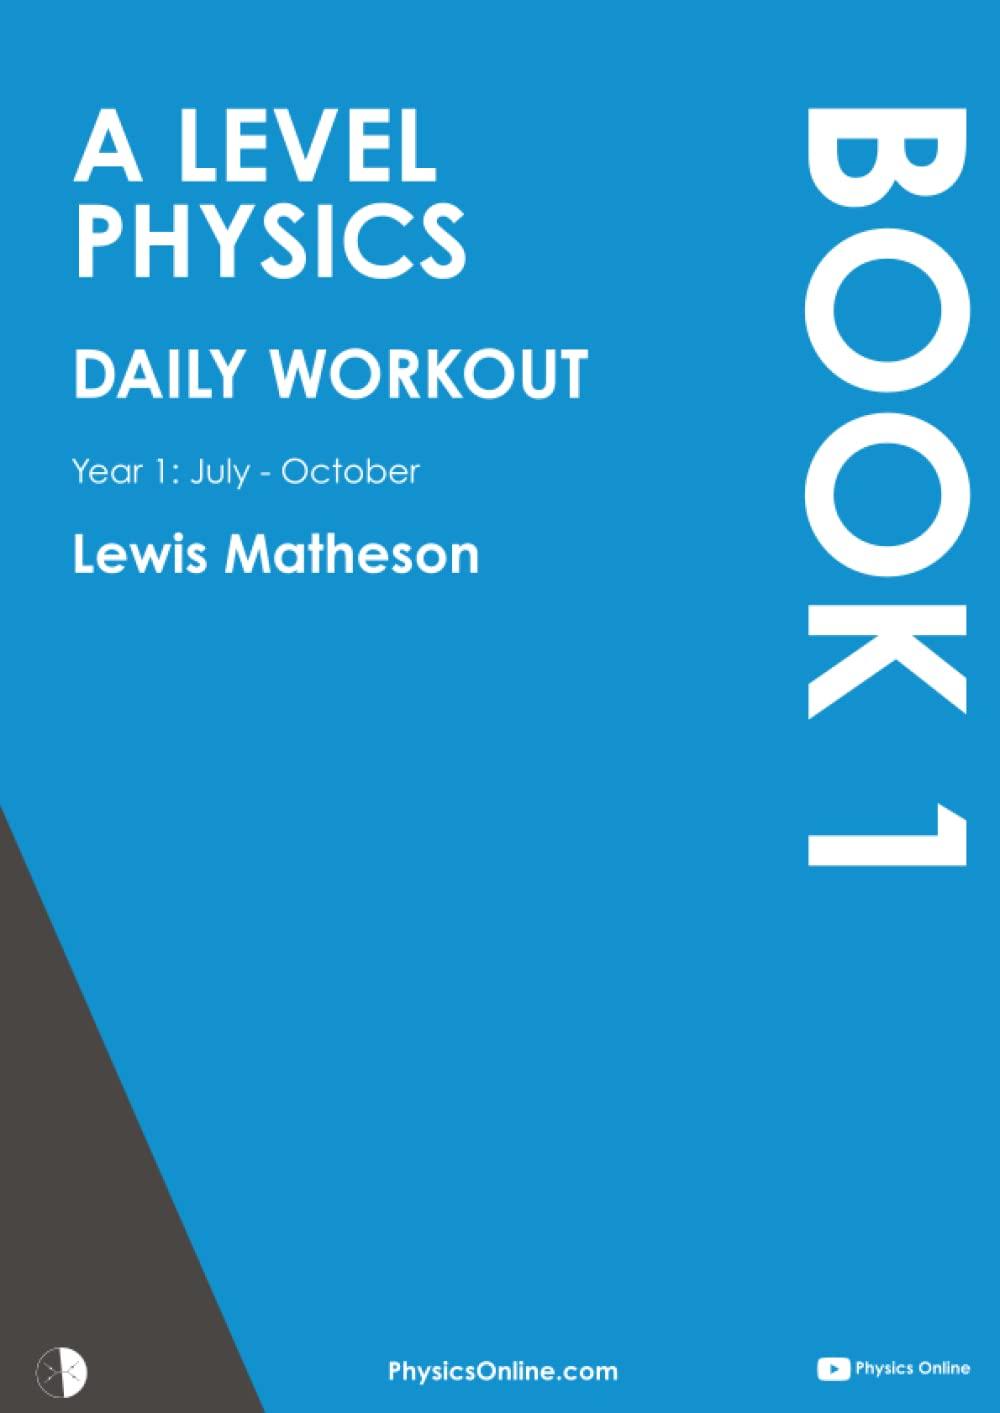 a level physics daily workout year 1 july to october book 1 1st edition physics online, lewis matheson